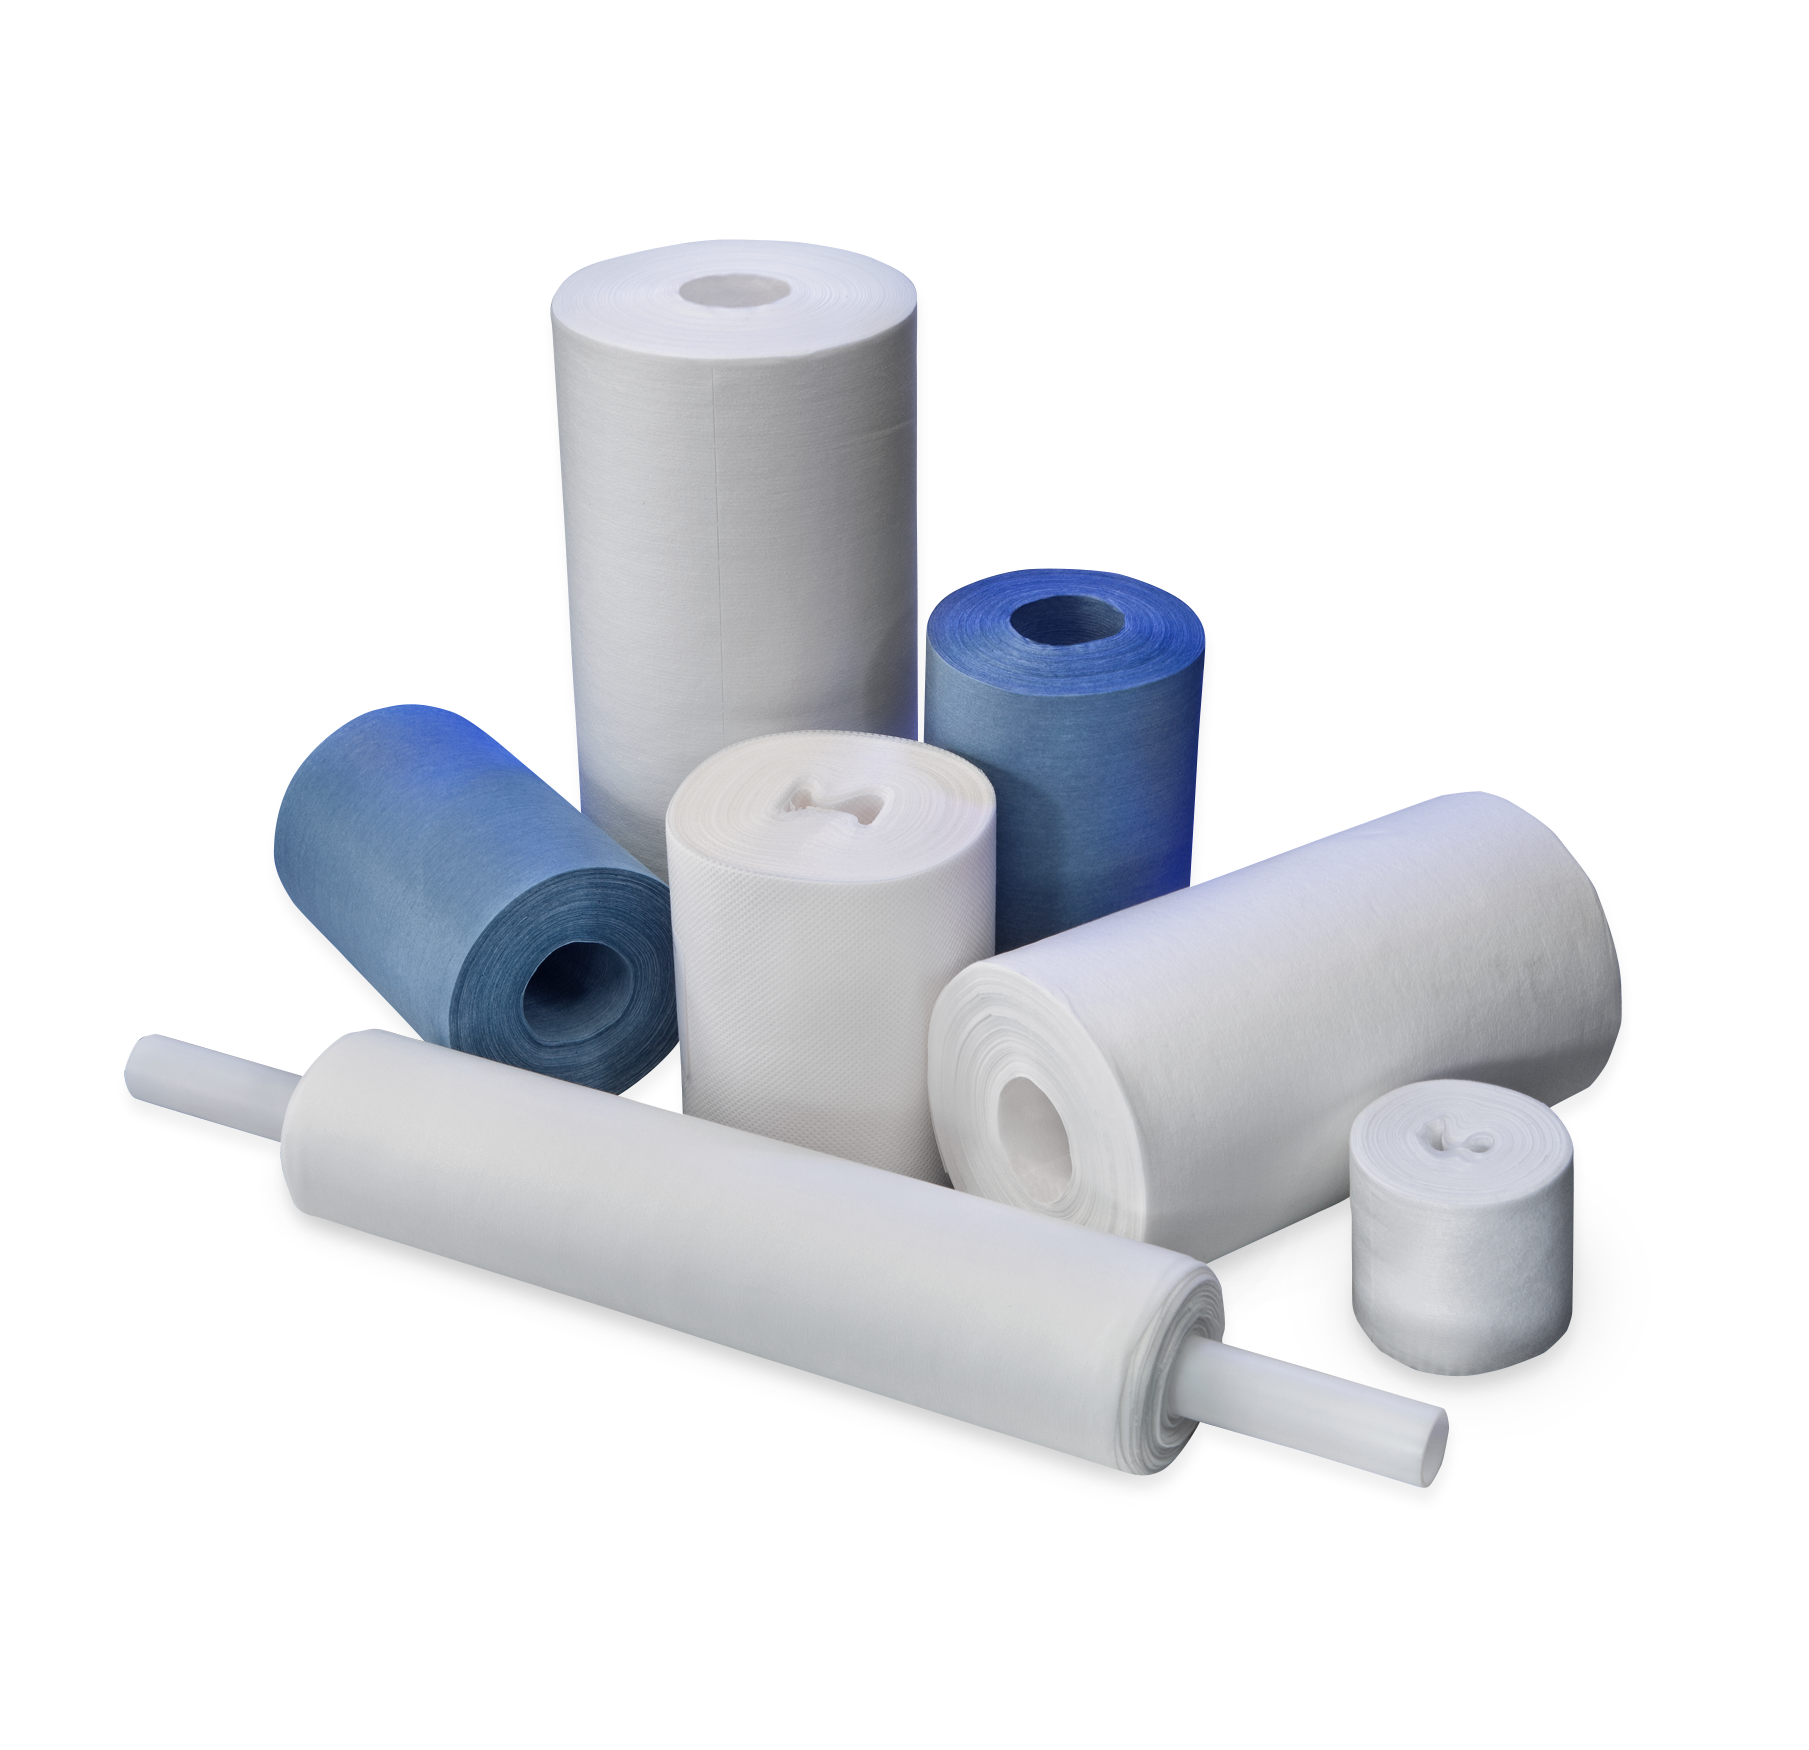 Perforated rolls